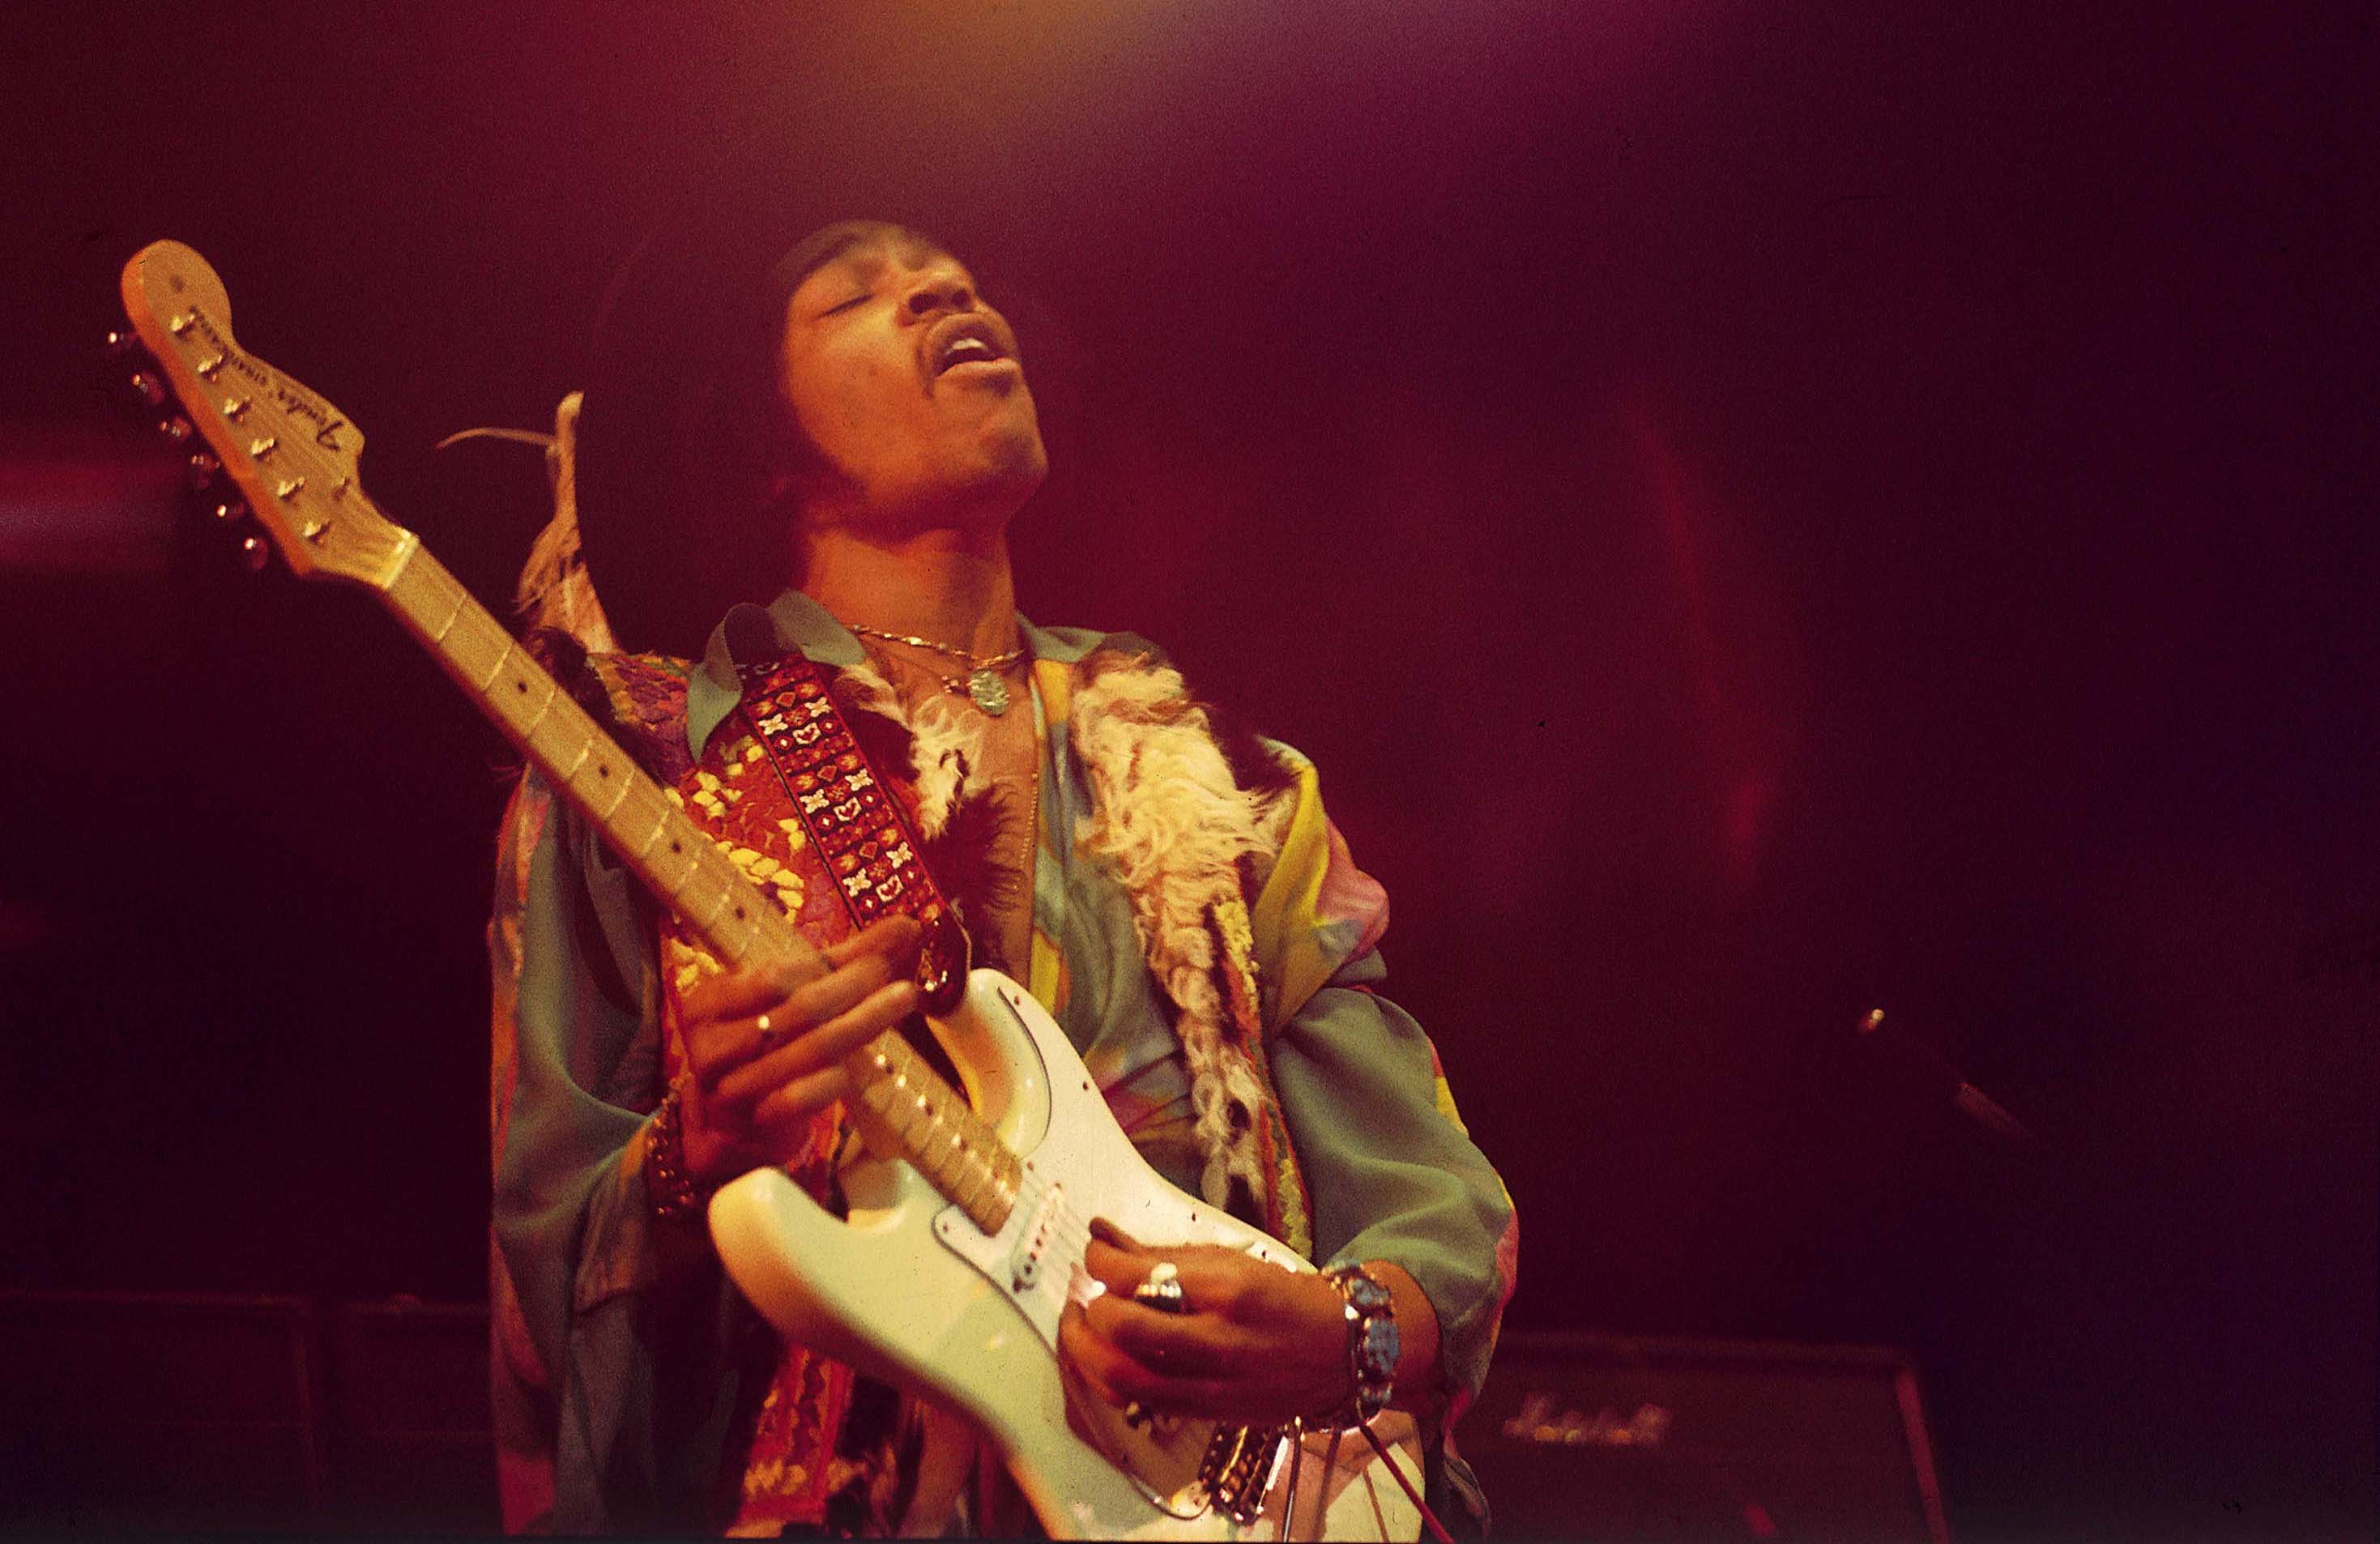 Jimi Hendrix, who has many memorable quotes on life and politics, playing his guitar on stage